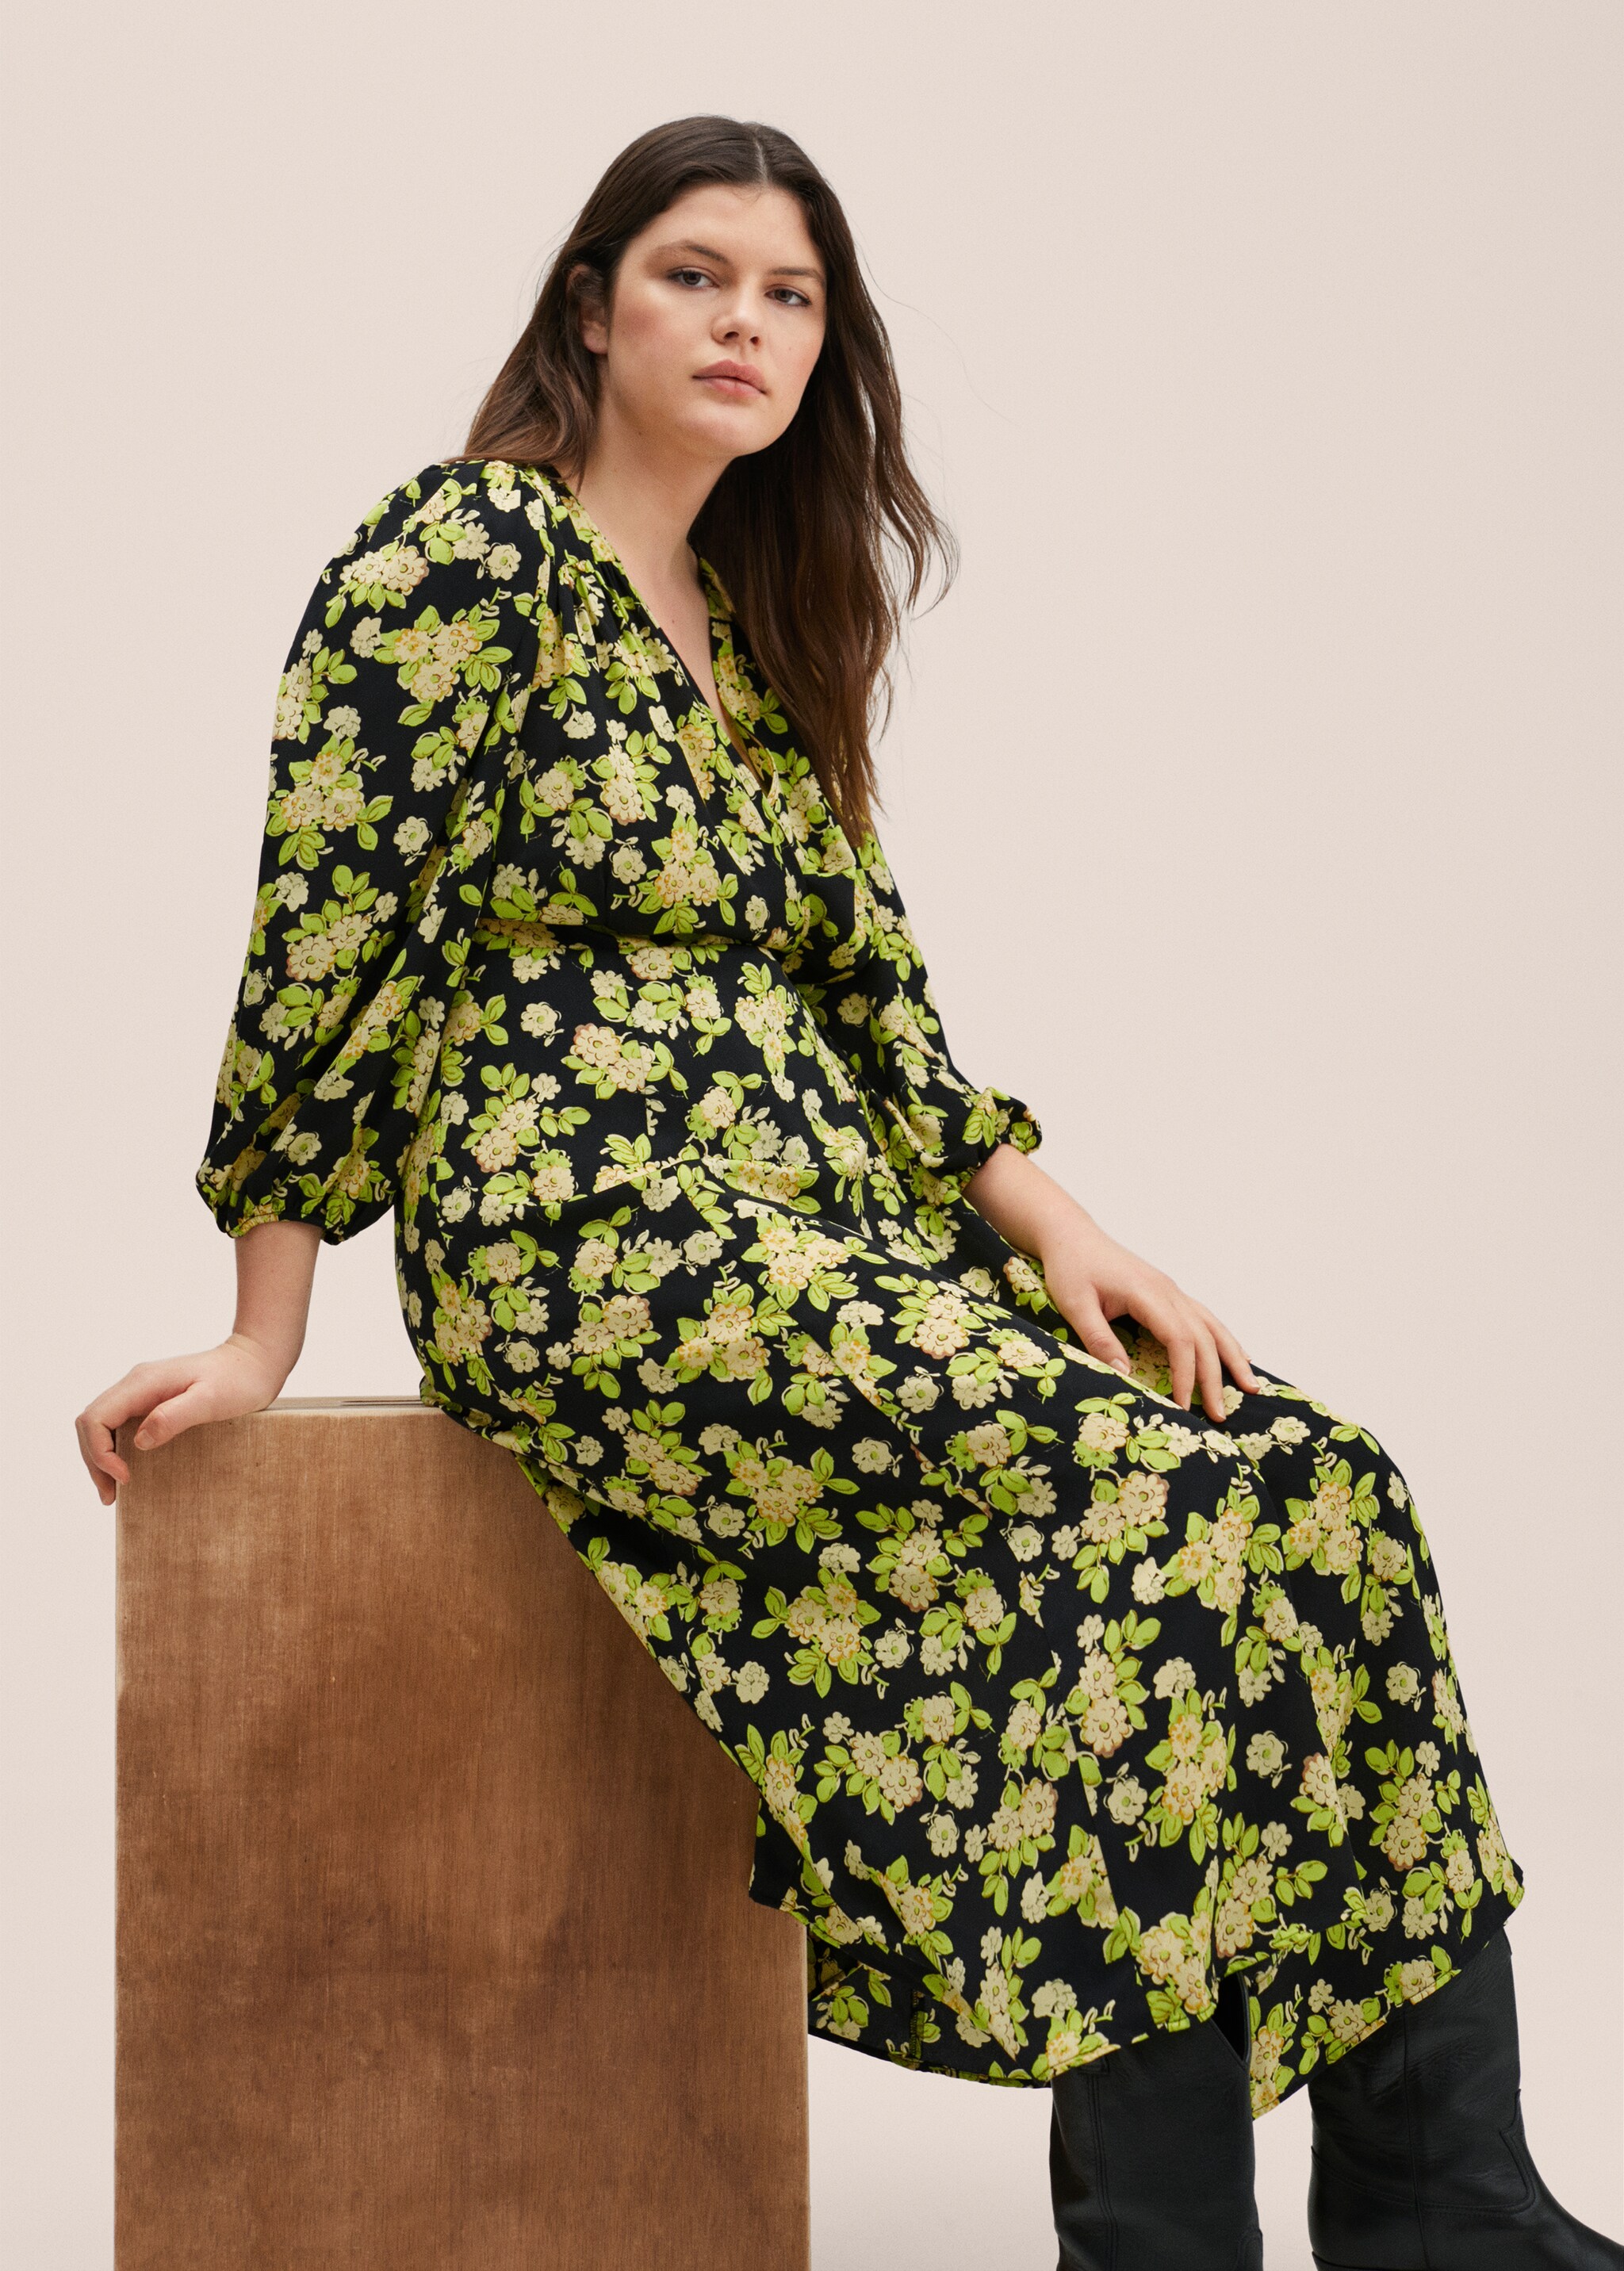 Flower print dress - Details of the article 5